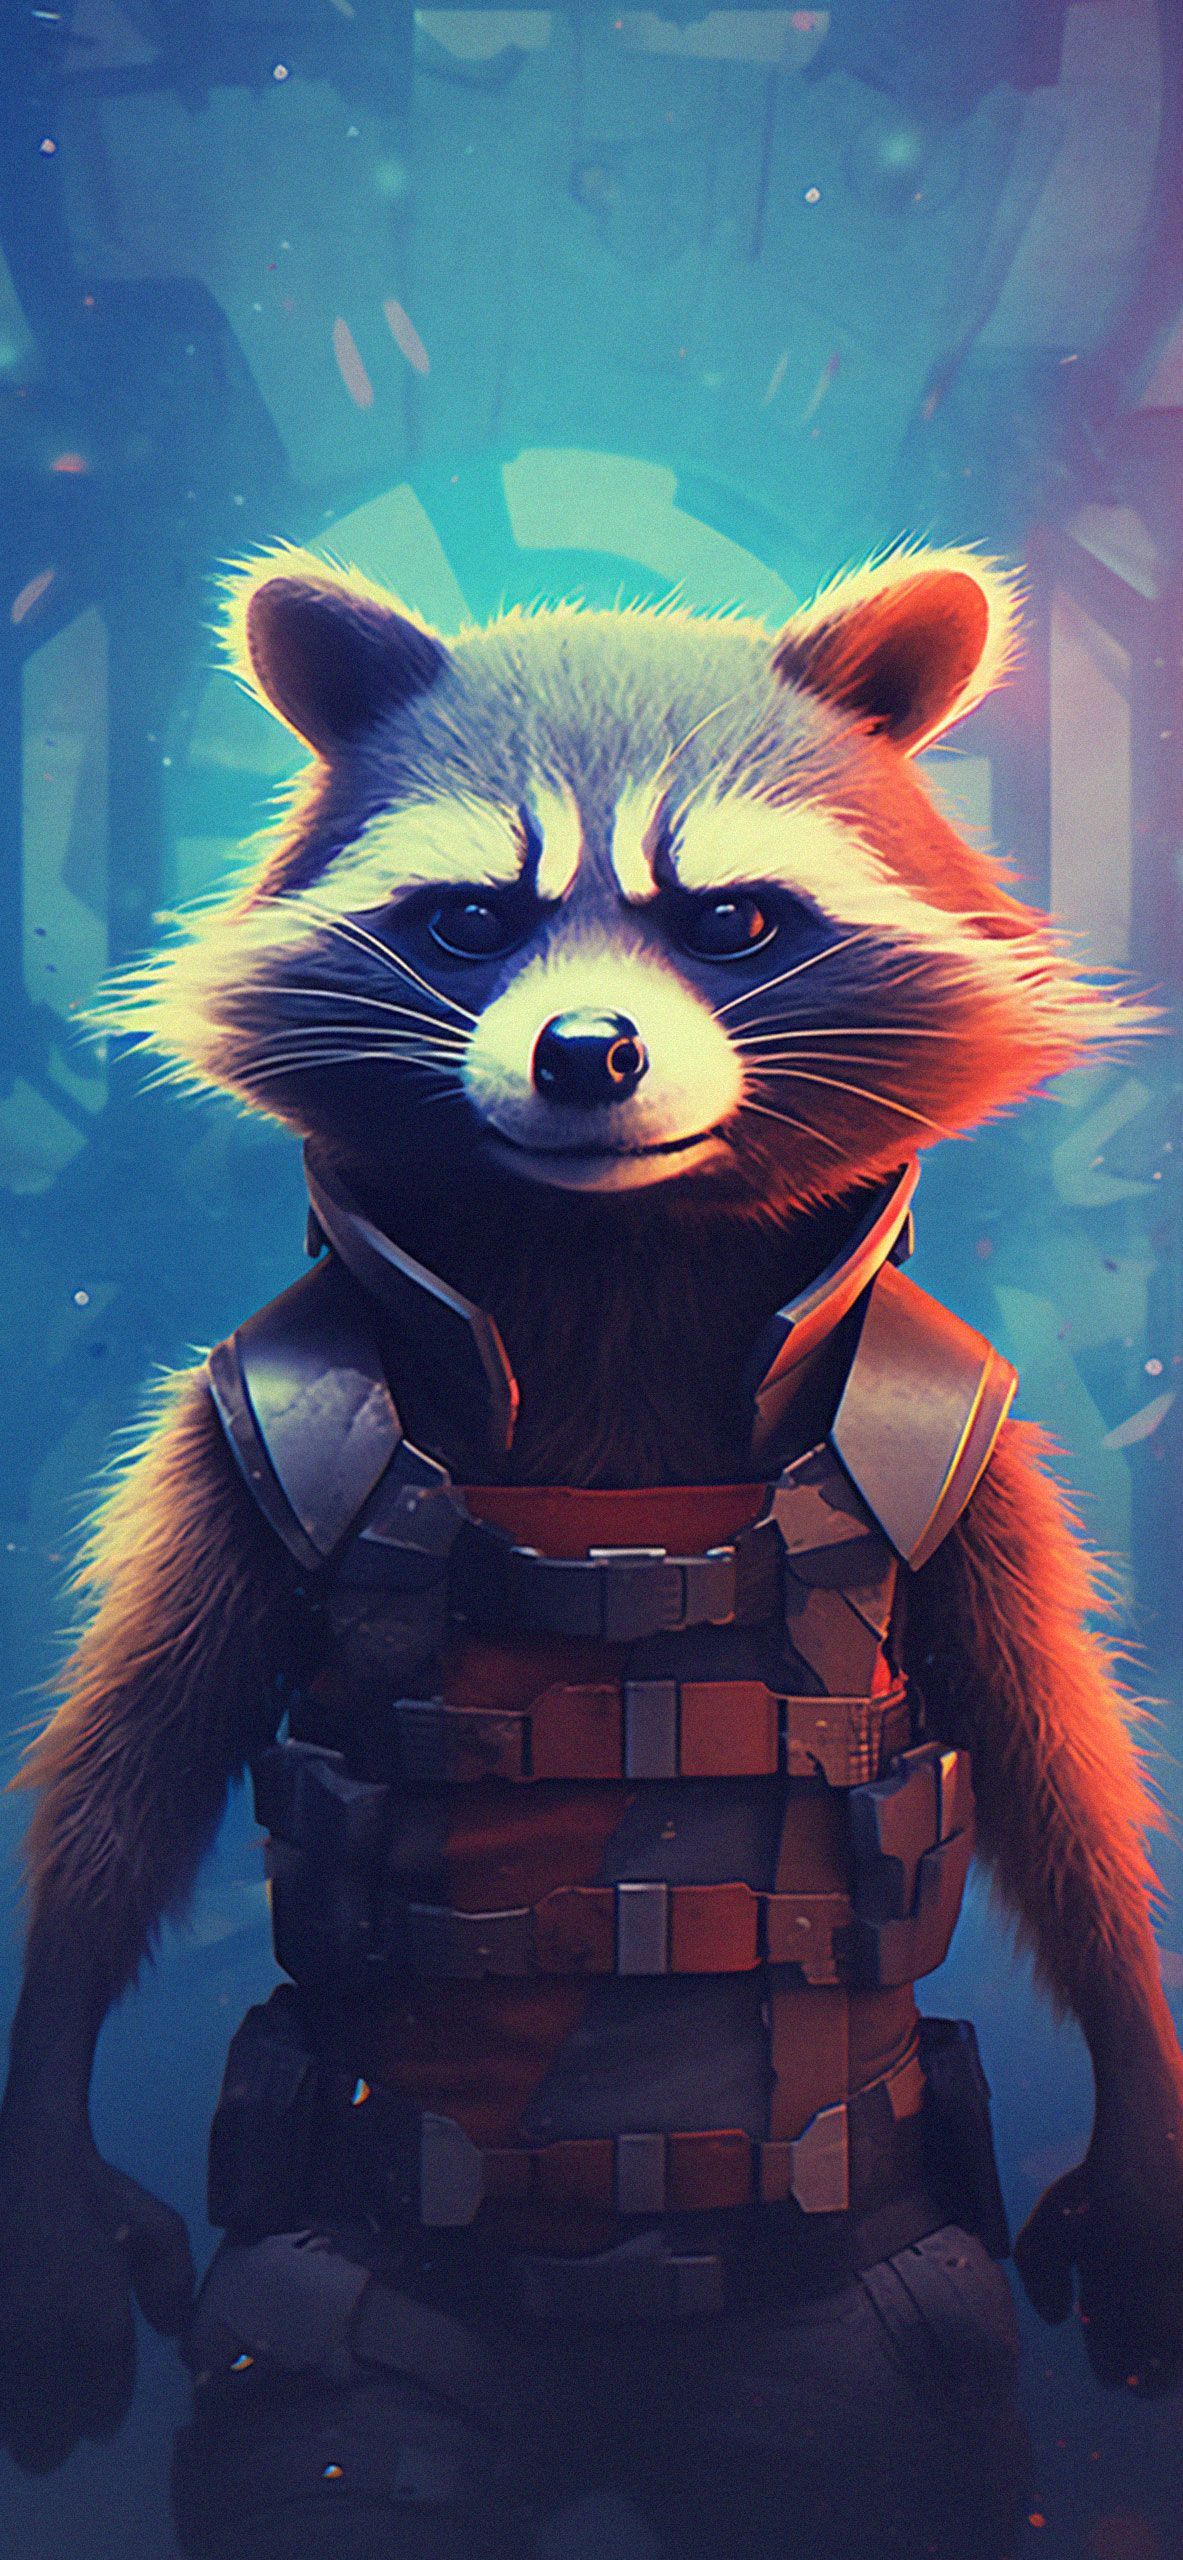 Rocket raccoon in a spacesuit in the background of the planet - Guardians of the Galaxy